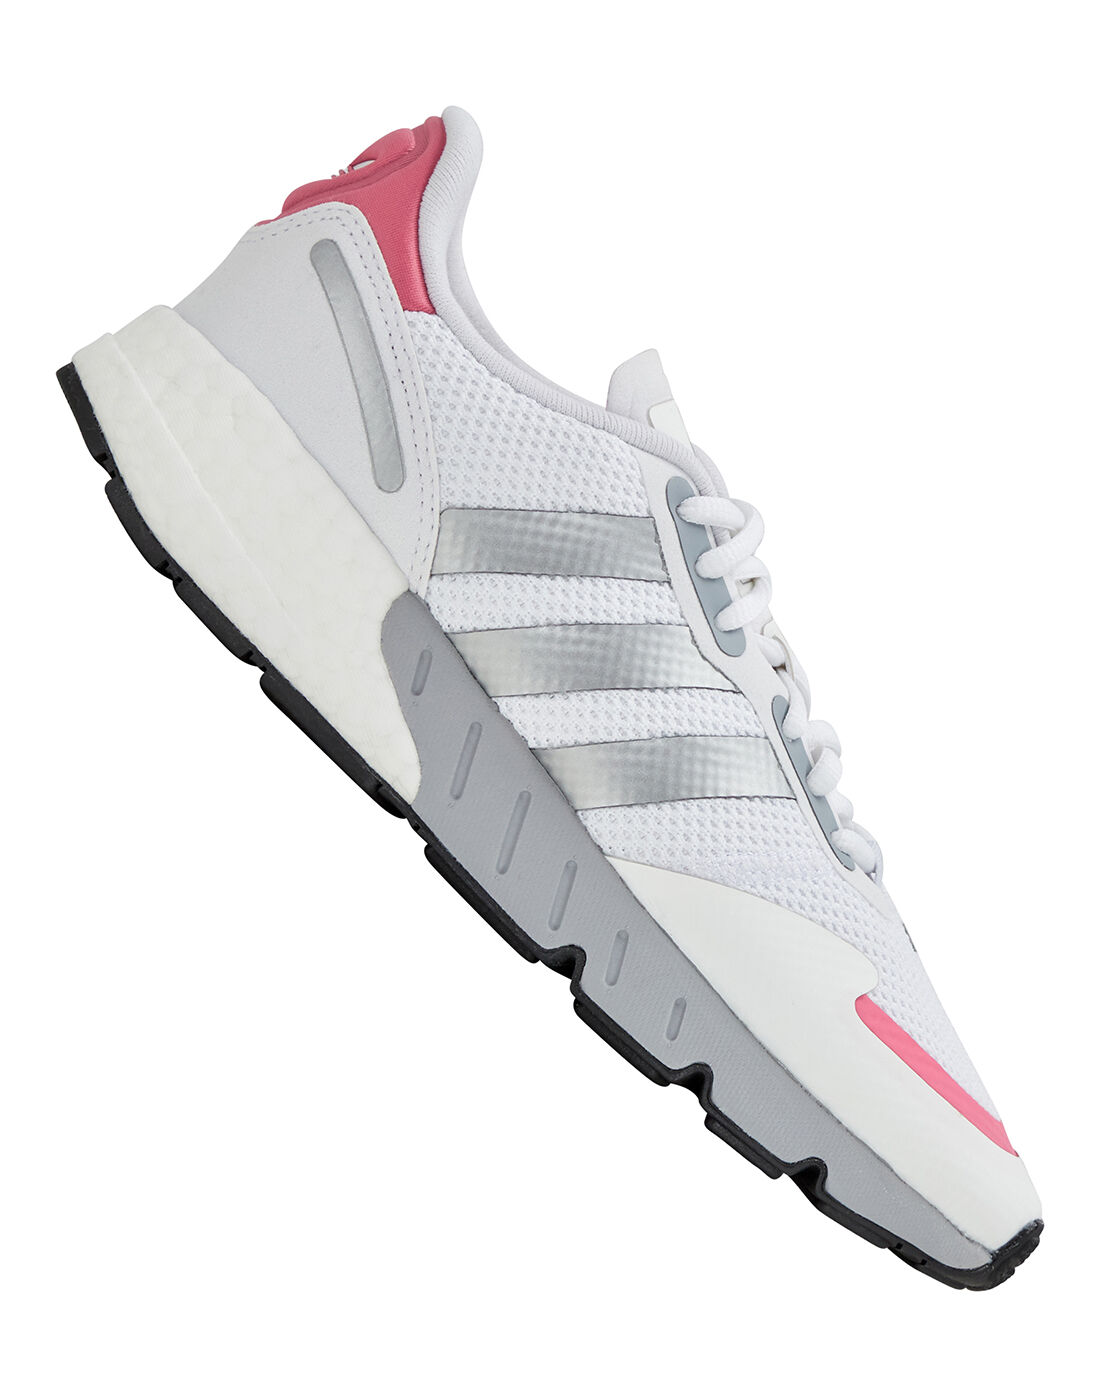 adidas boost 675001 2017 price guide 2018 free - adidas Originals Womens ZX  1K Boost - White | adidas telstar shoes price match guarantee IE